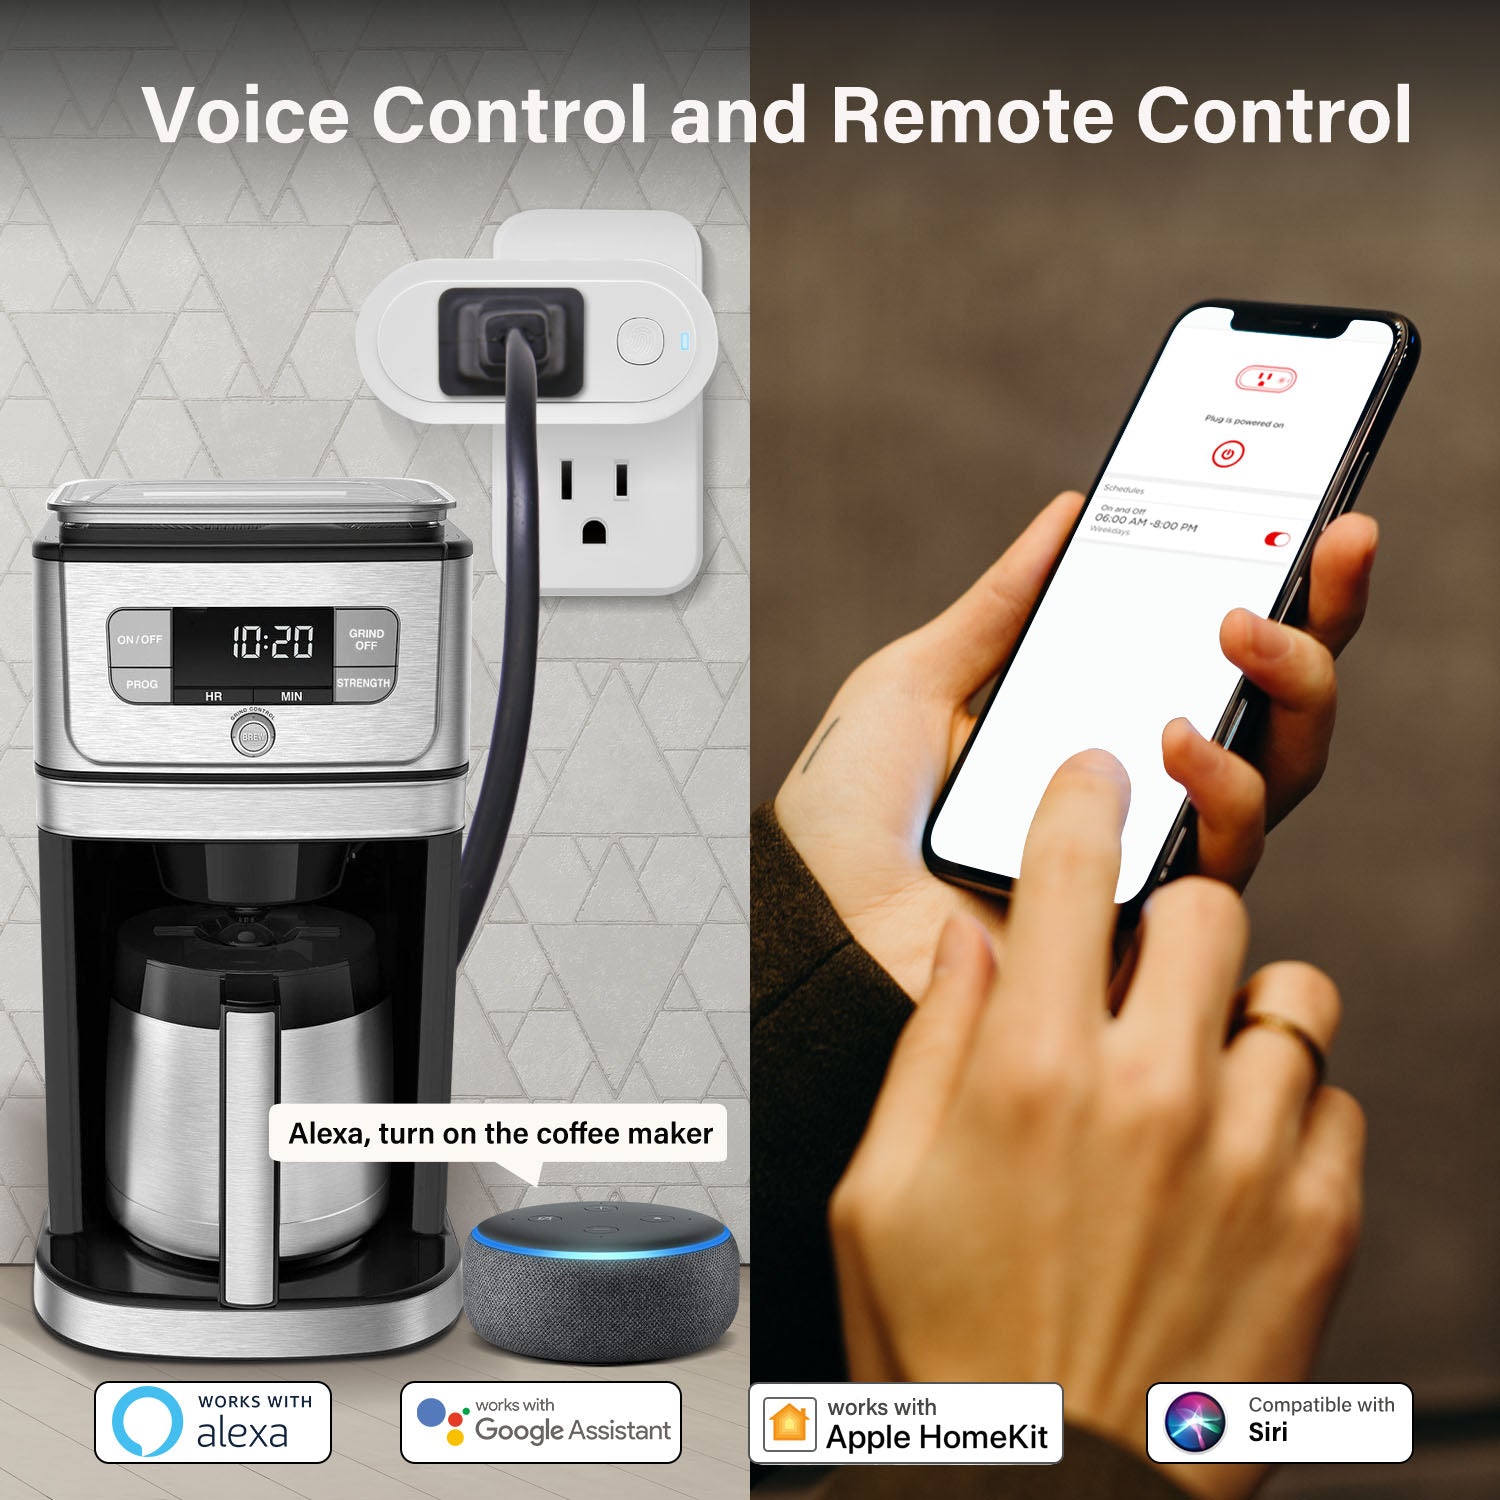 Smart Control: Take control of your Zigbee devices using the Sengled Home app or voice commands with popular voice assistants like Alexa, Google Assistant, SmartThings, and Apple HomeKit.